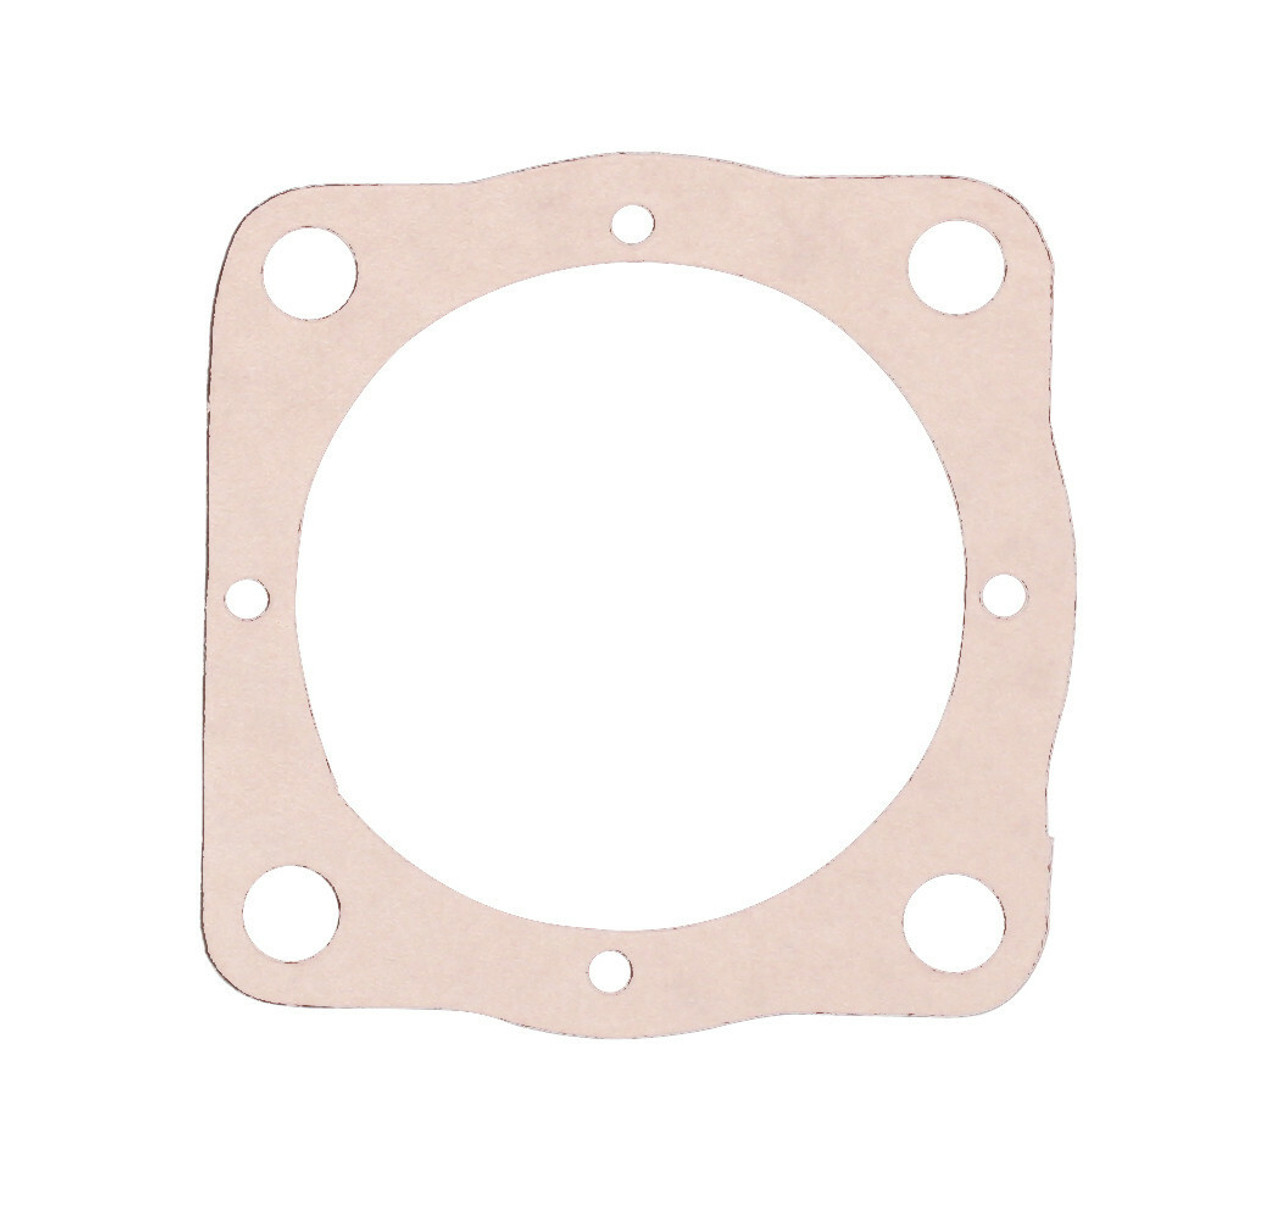 Oil Pump Cover Gasket, fits VW Type 1 67-79, Ghia 67-74, Type 2 67-71, Type 3 67-73